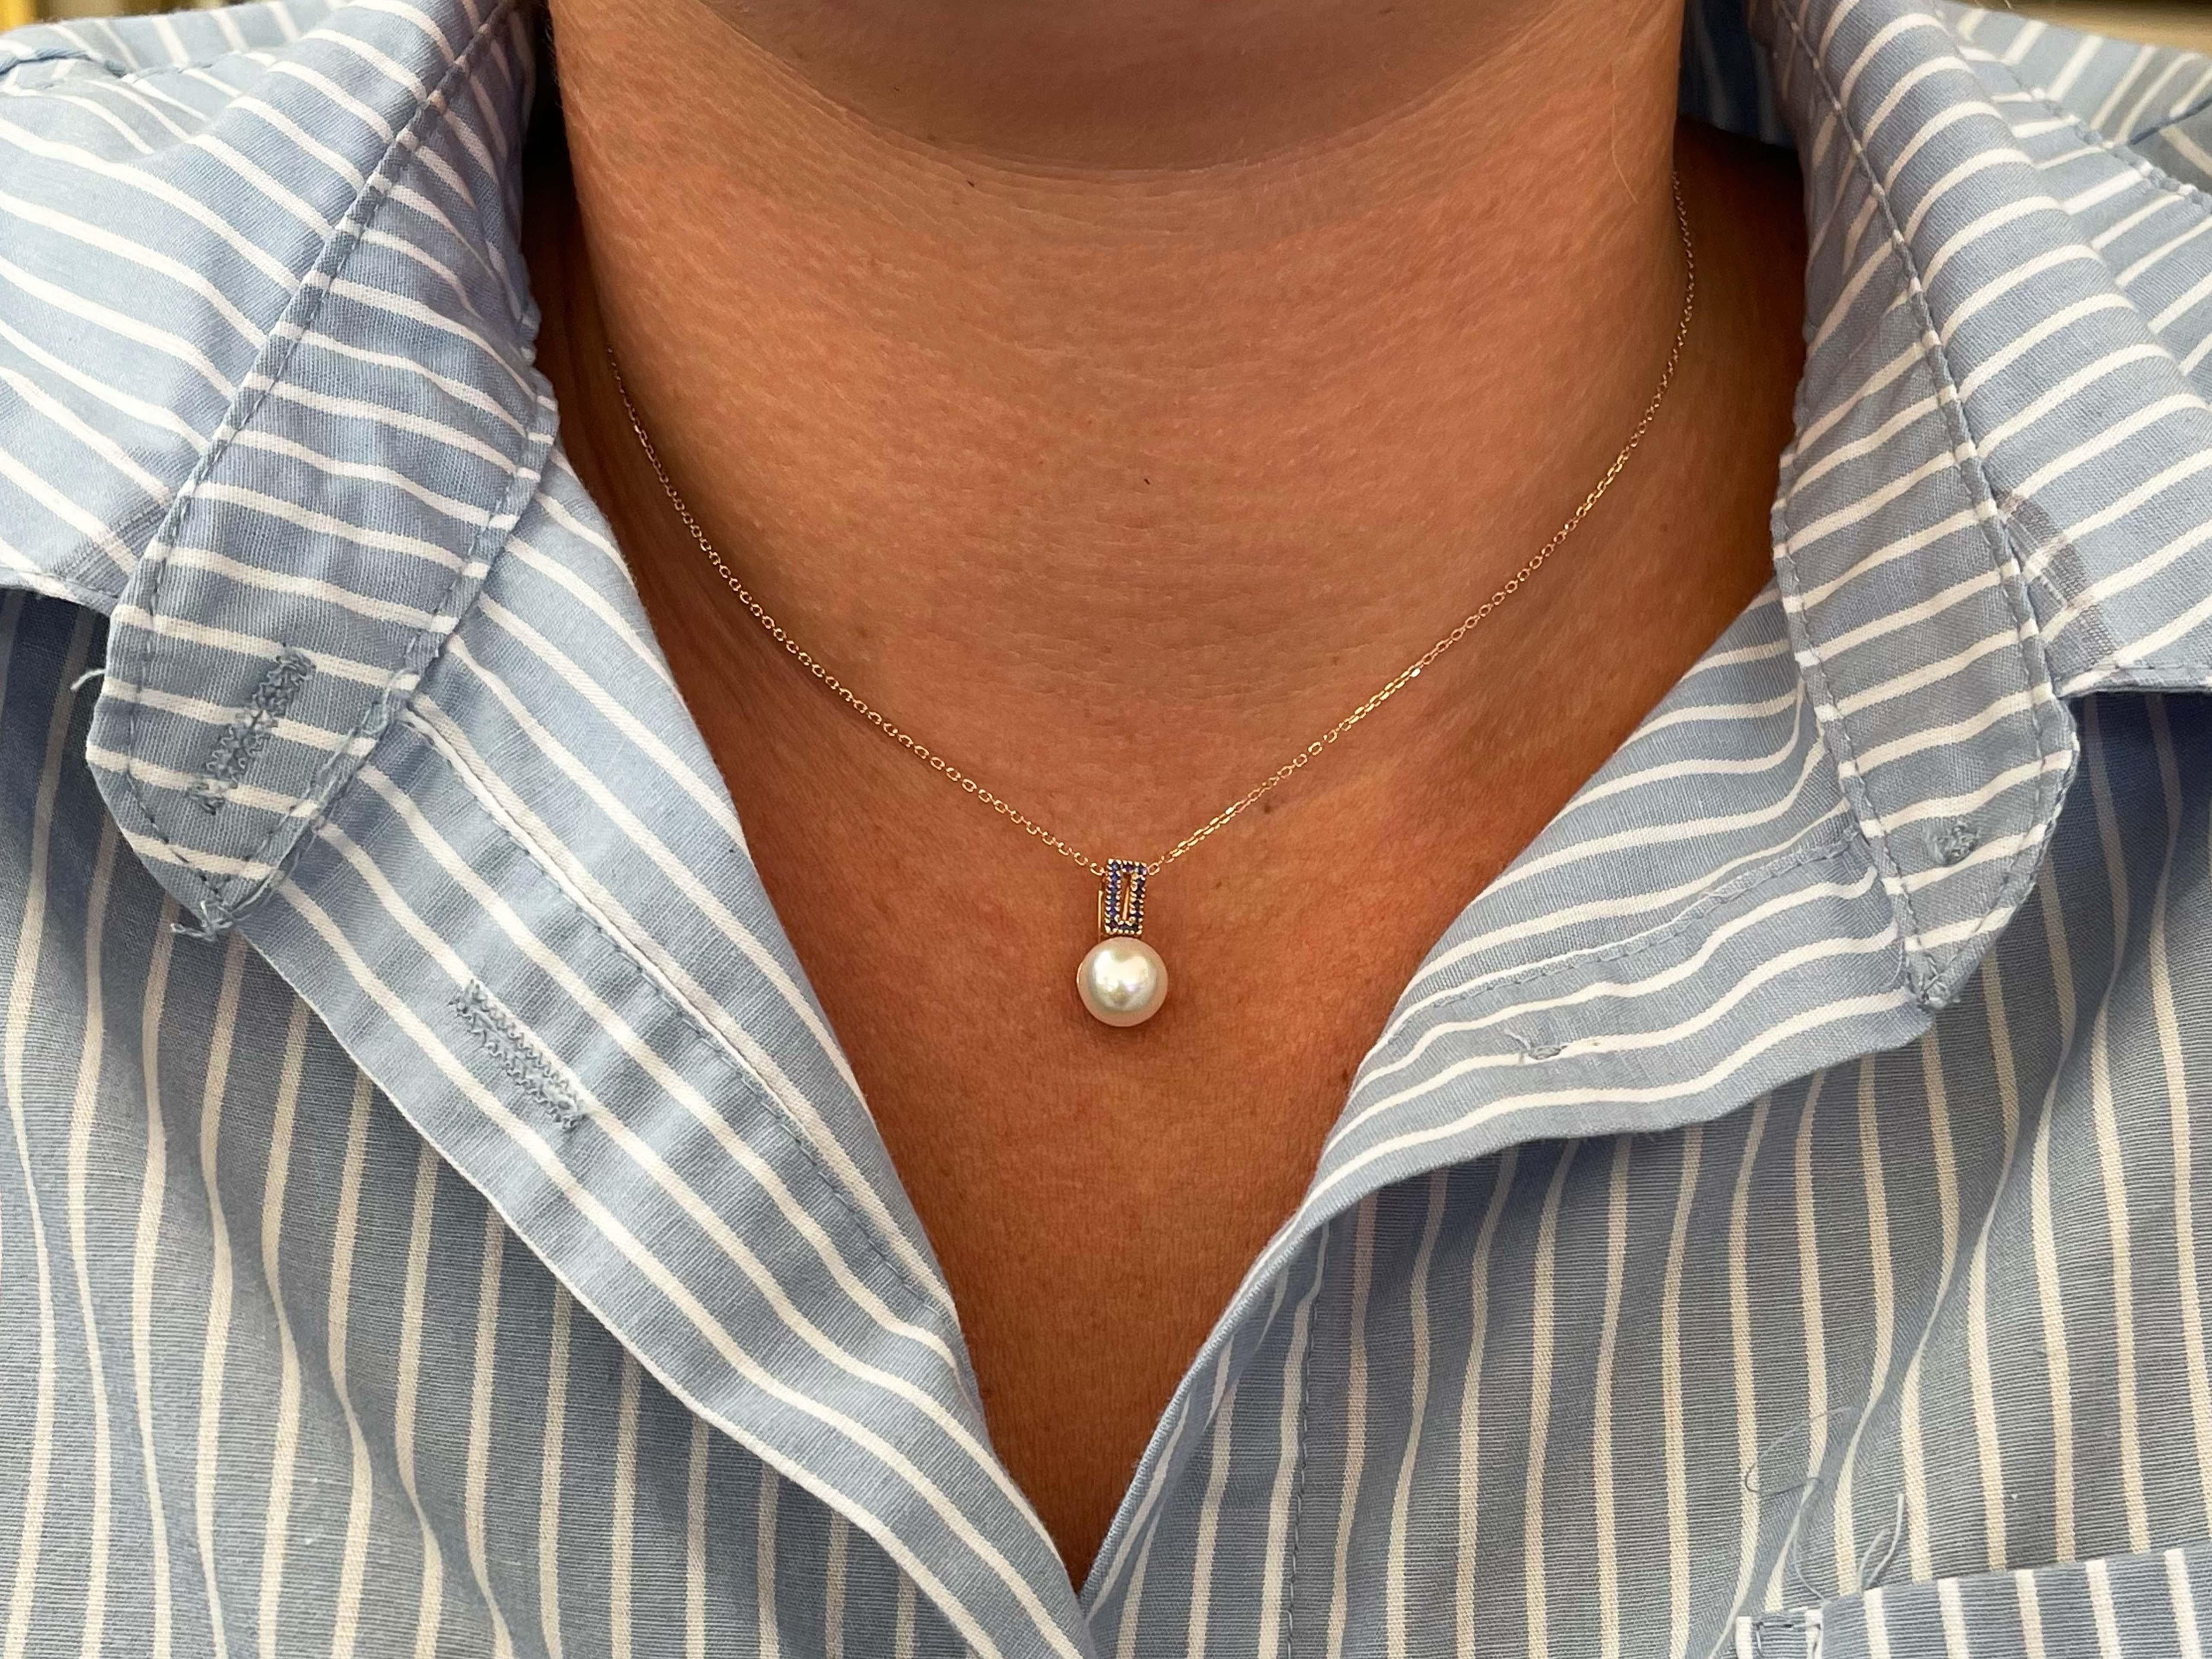 White Pearl and Sapphire Pendant with Chain in 14k Rose Gold. The pendant features a white akoya pearl, 8.4 mm in diameter and has 14 deep blue, bead set, round sapphires in a rectangle shape above the pearl. The pendant comes on a 16